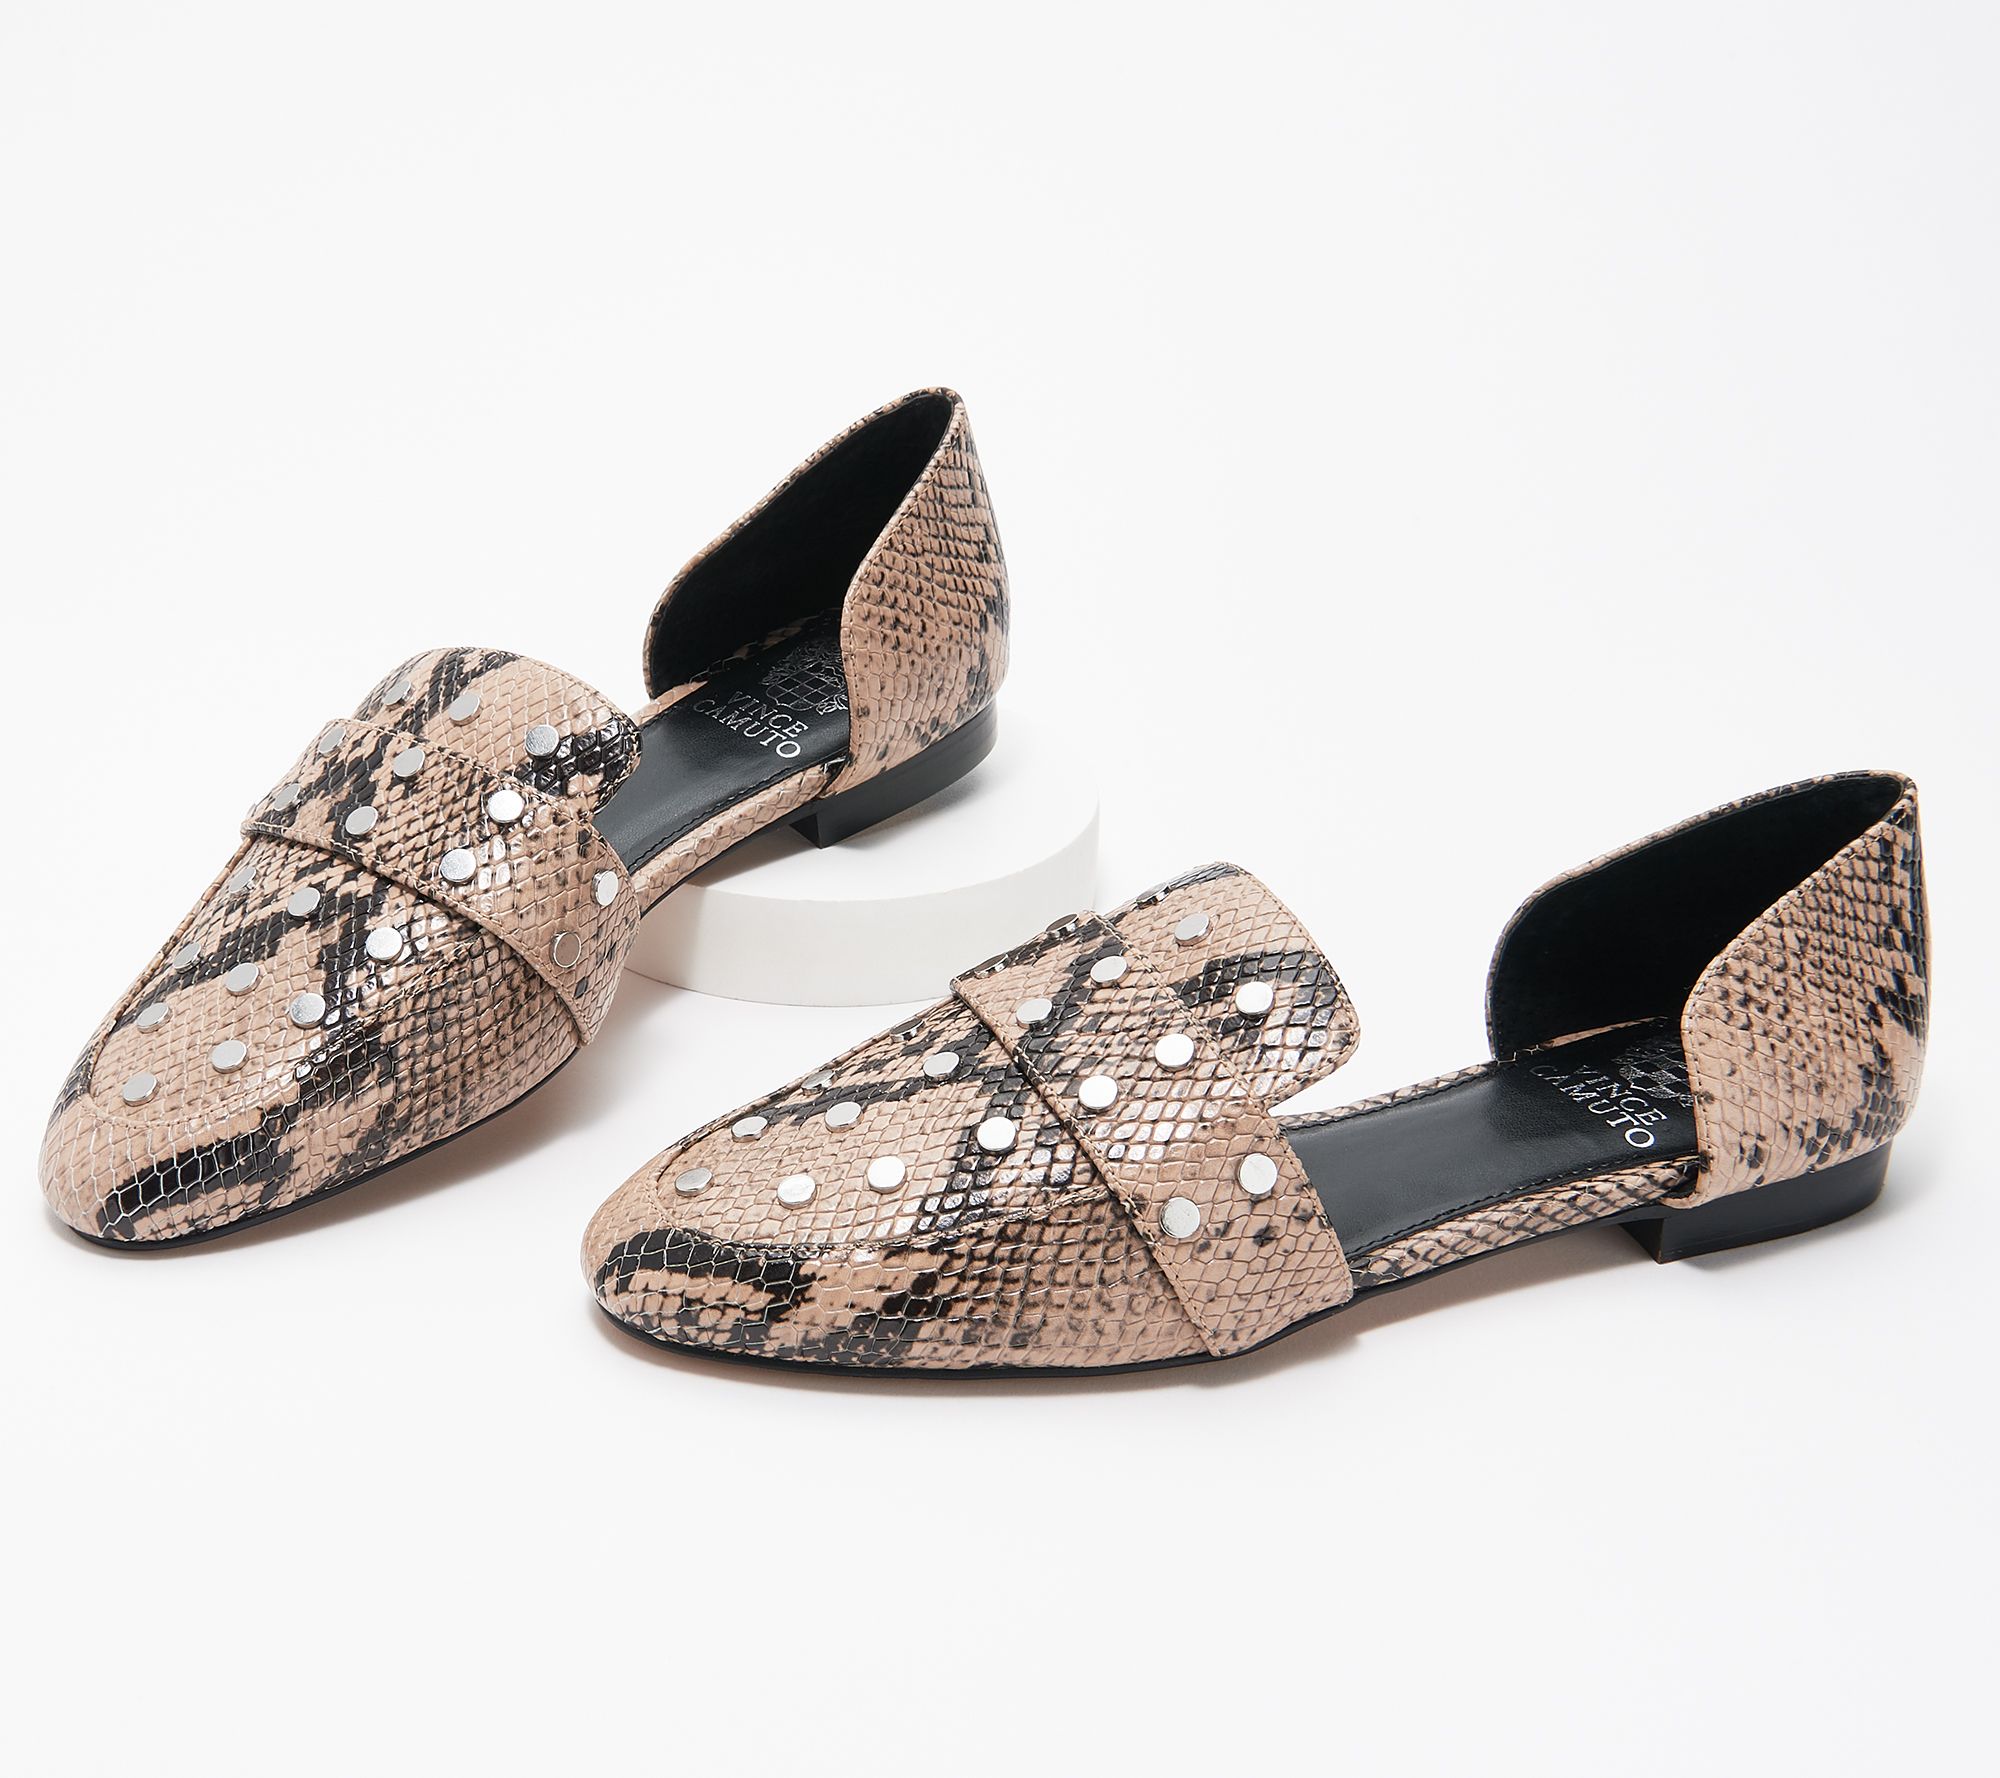 Vince Camuto Leather Two-Piece Studded Flats - Wenerly - QVC.com